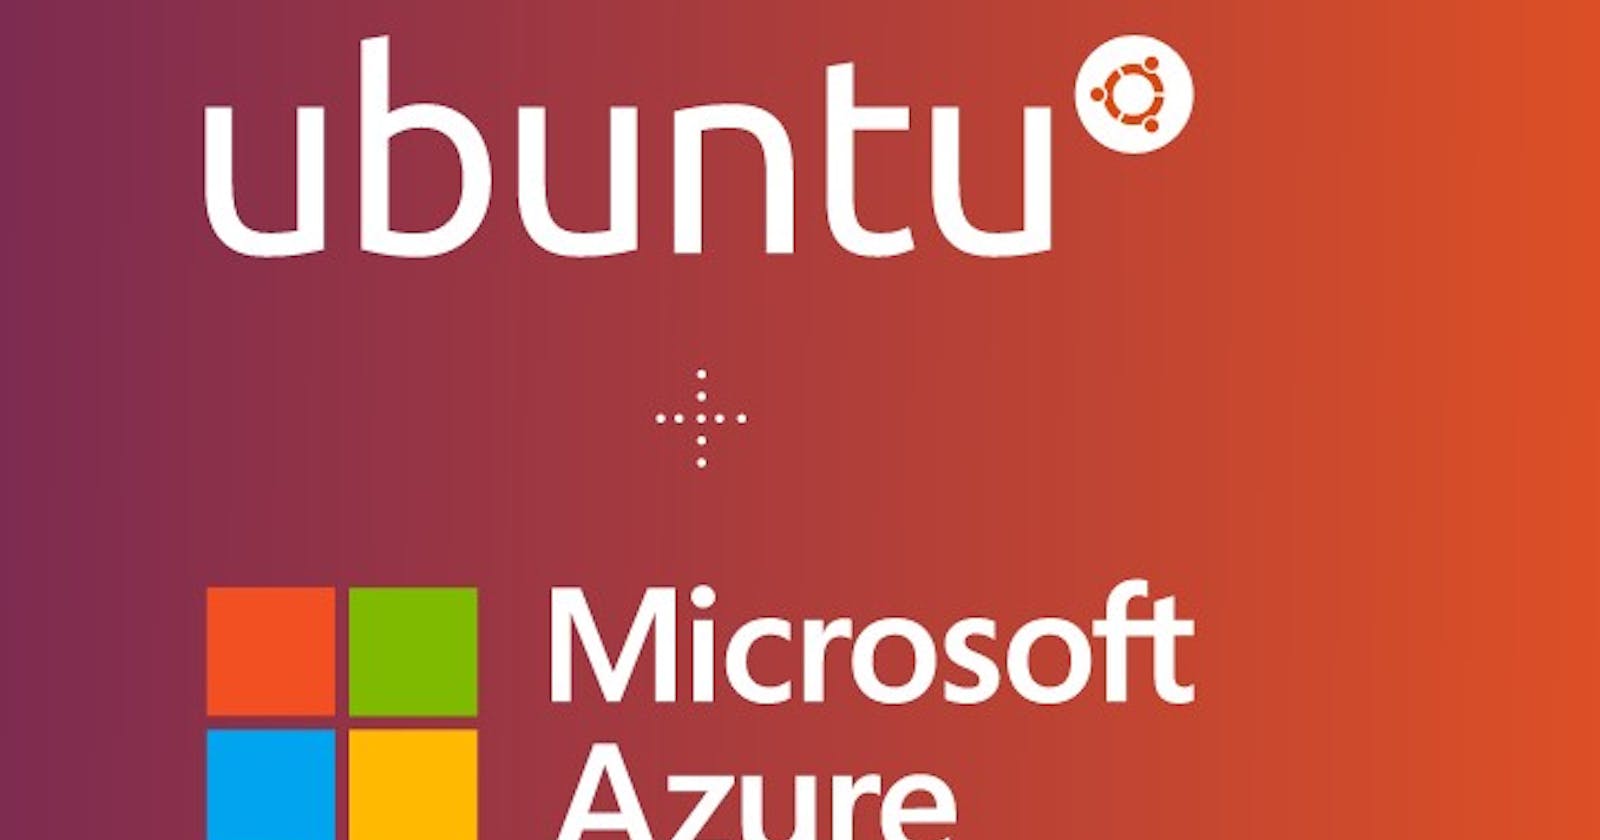 Deploying a Linux Virtual Machine (VM) in Microsoft Azure and Connecting to it via SSH